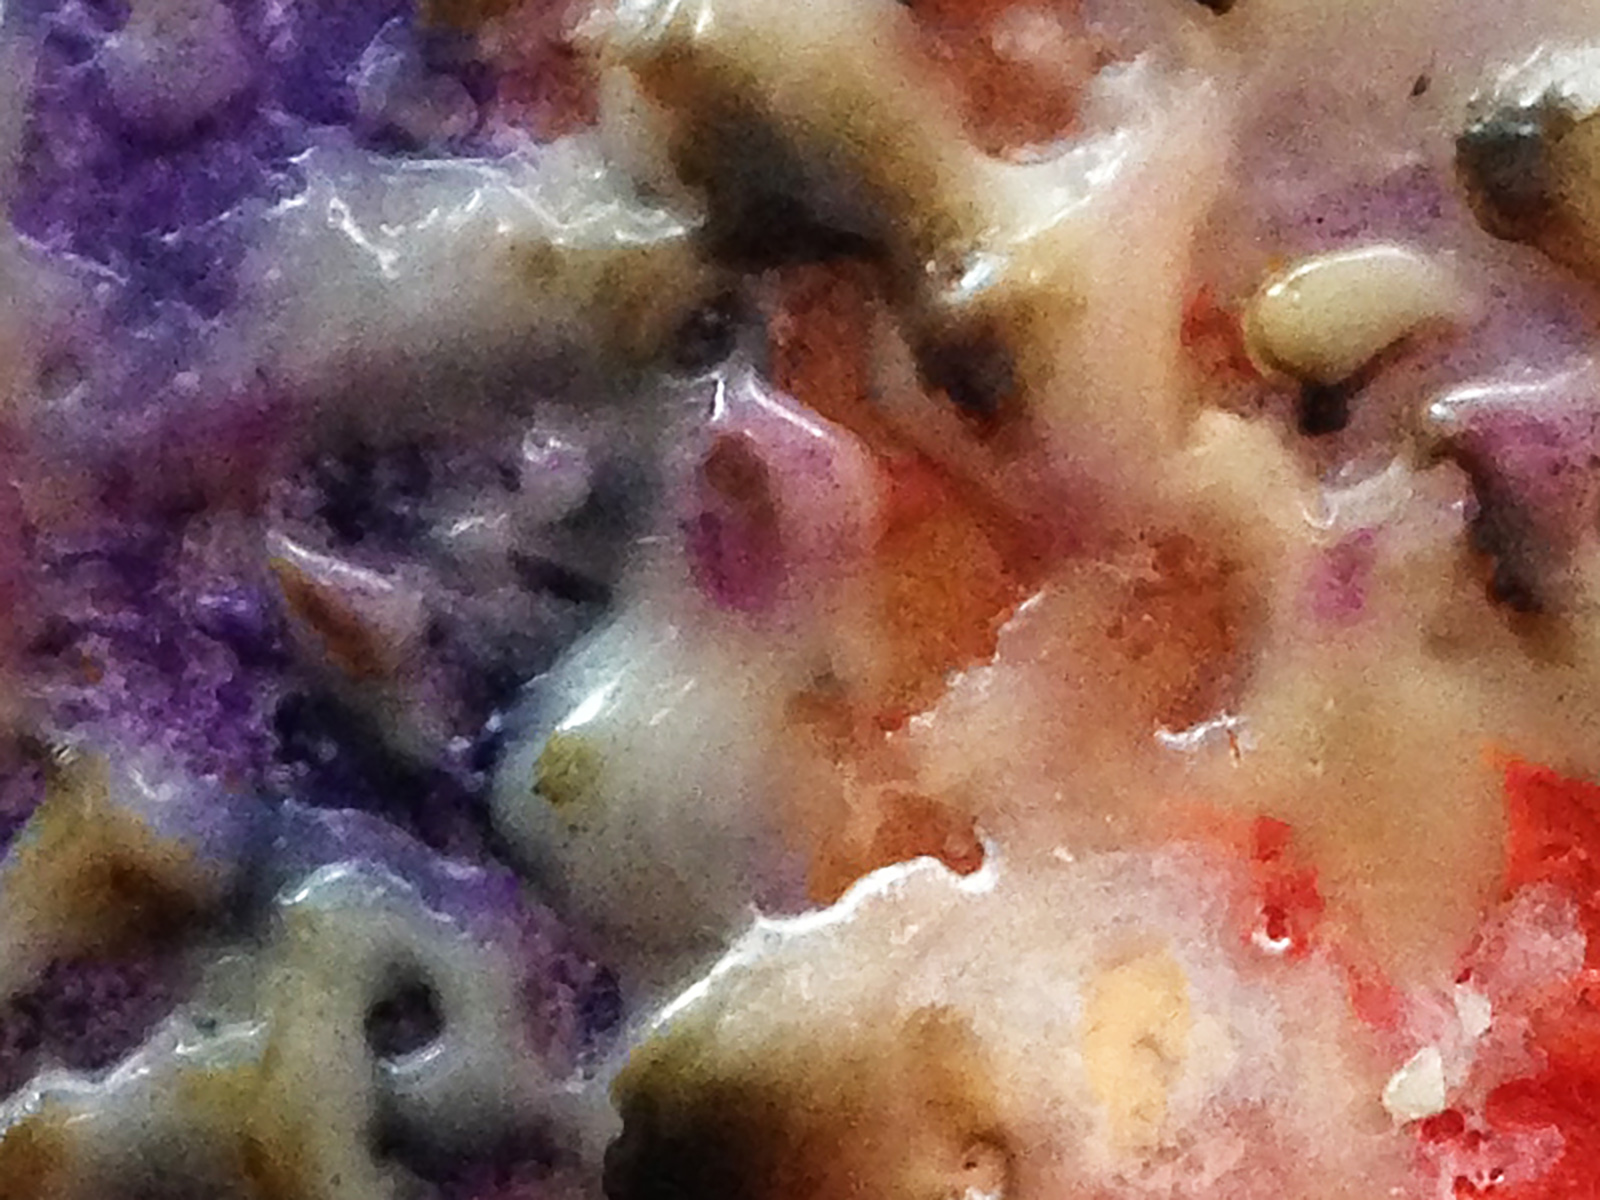 Artereal_Gallery_2014_Noula_Diamantopoulos-As-Above-iii_Detail3